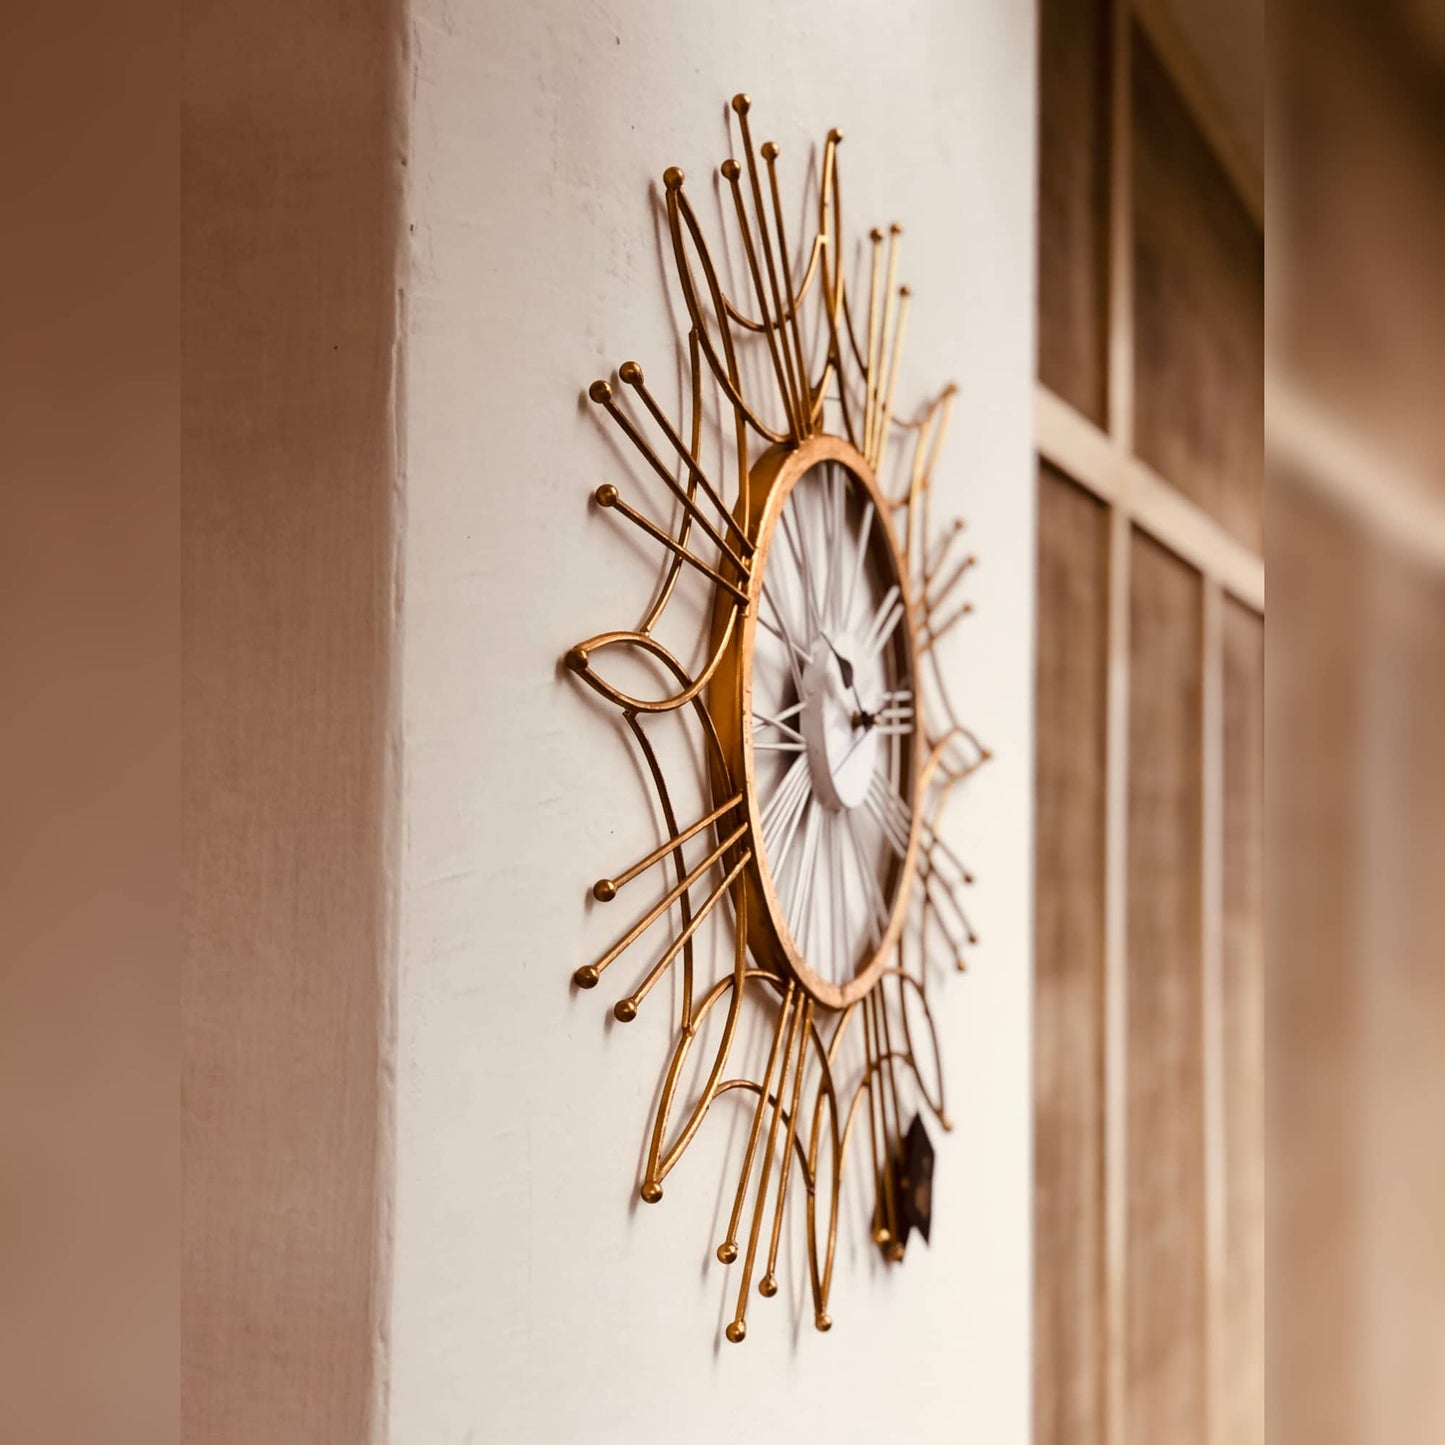 Golden & White Wall Clock | 25 Inch Dusky Lory